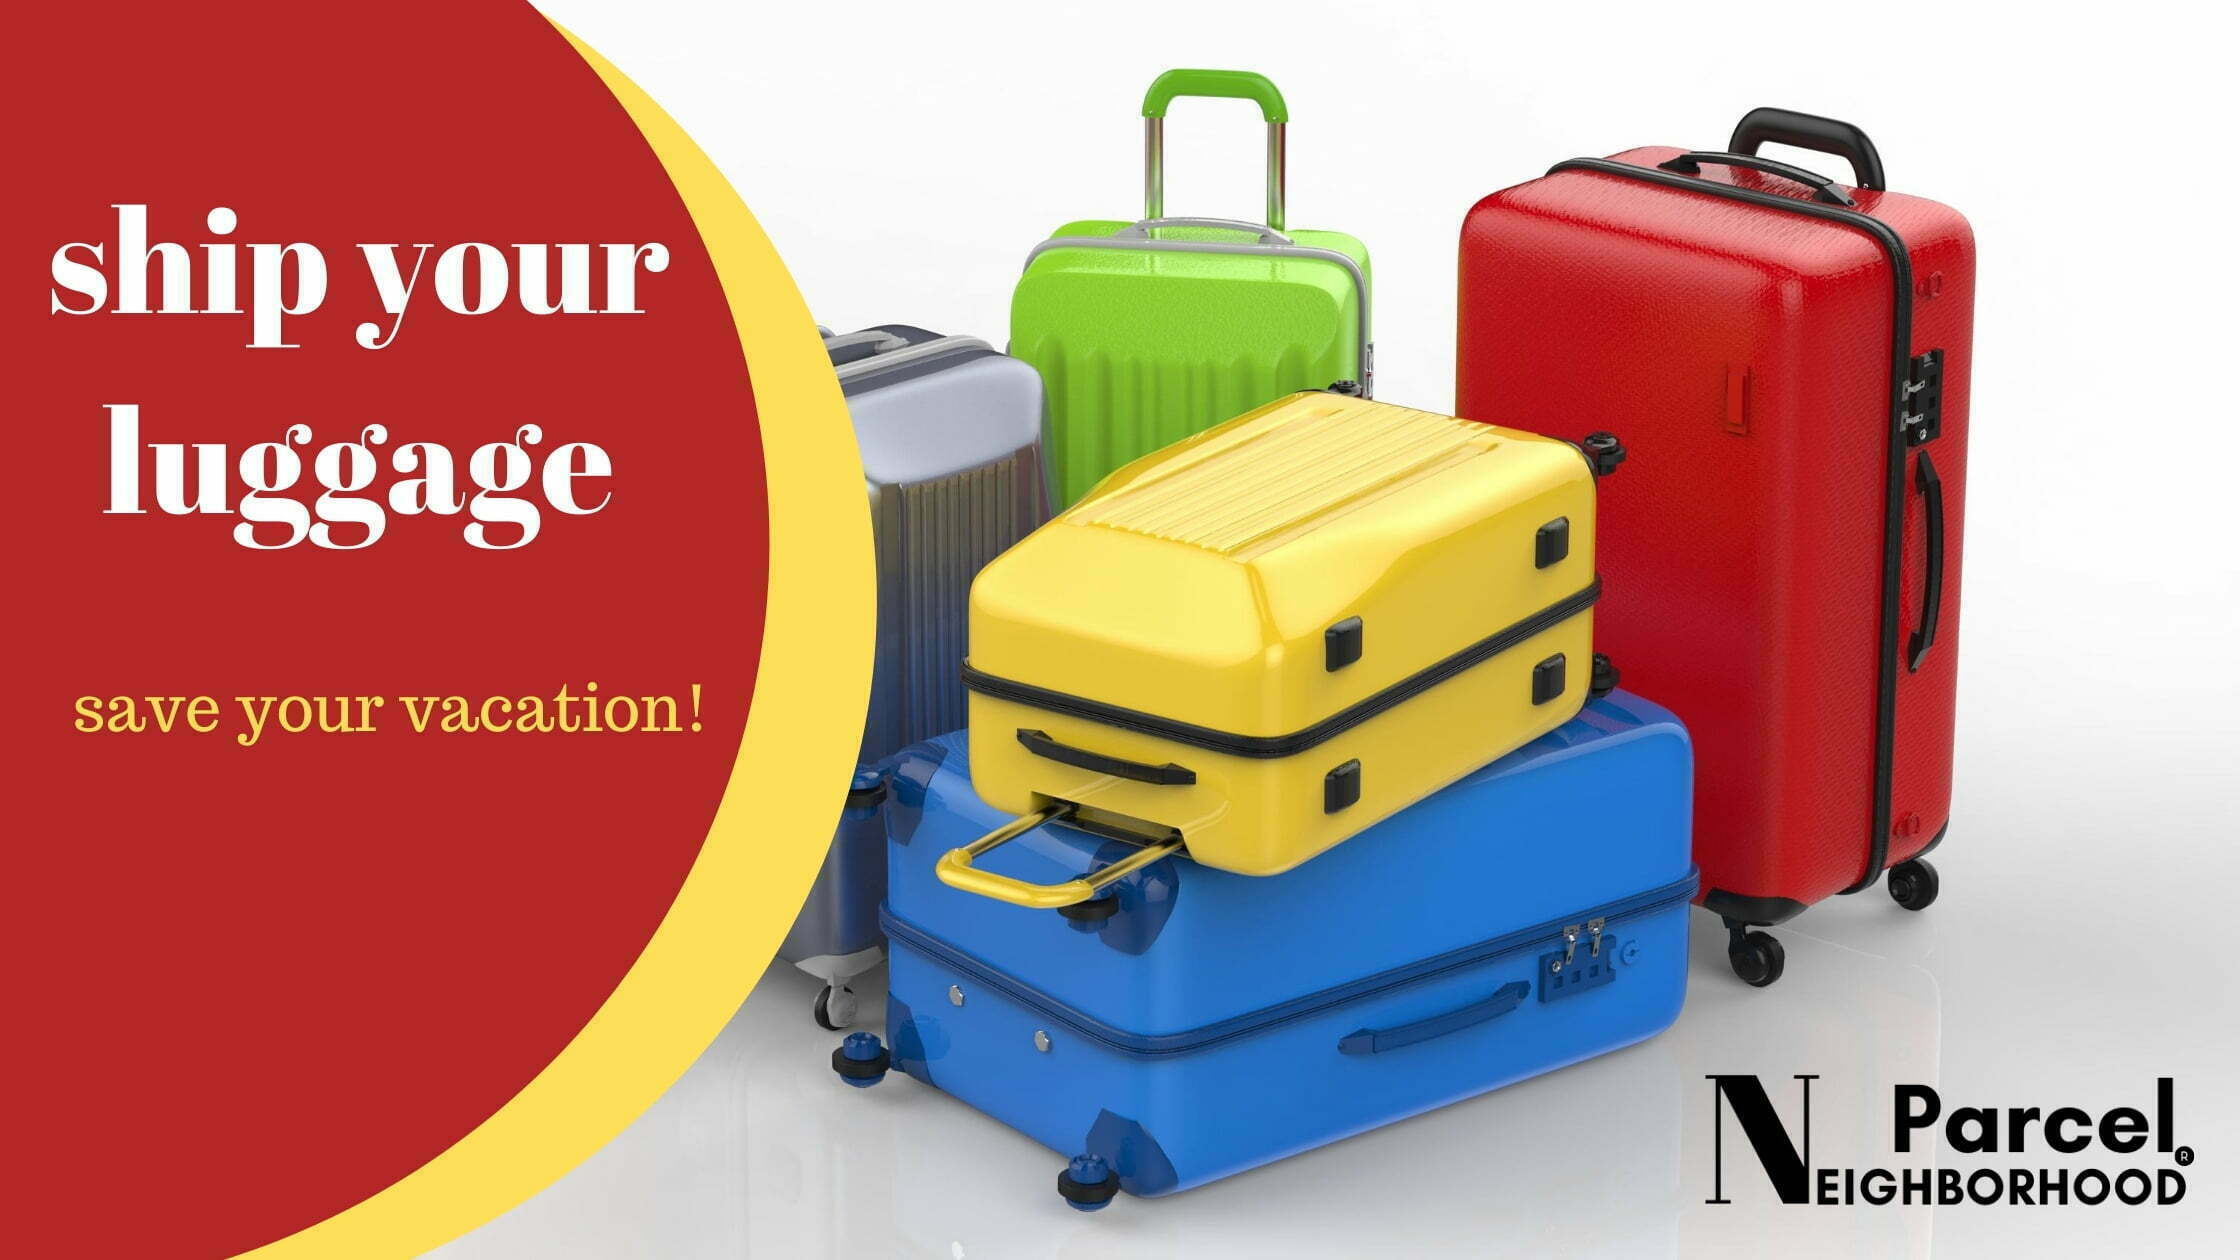 ship your luggage